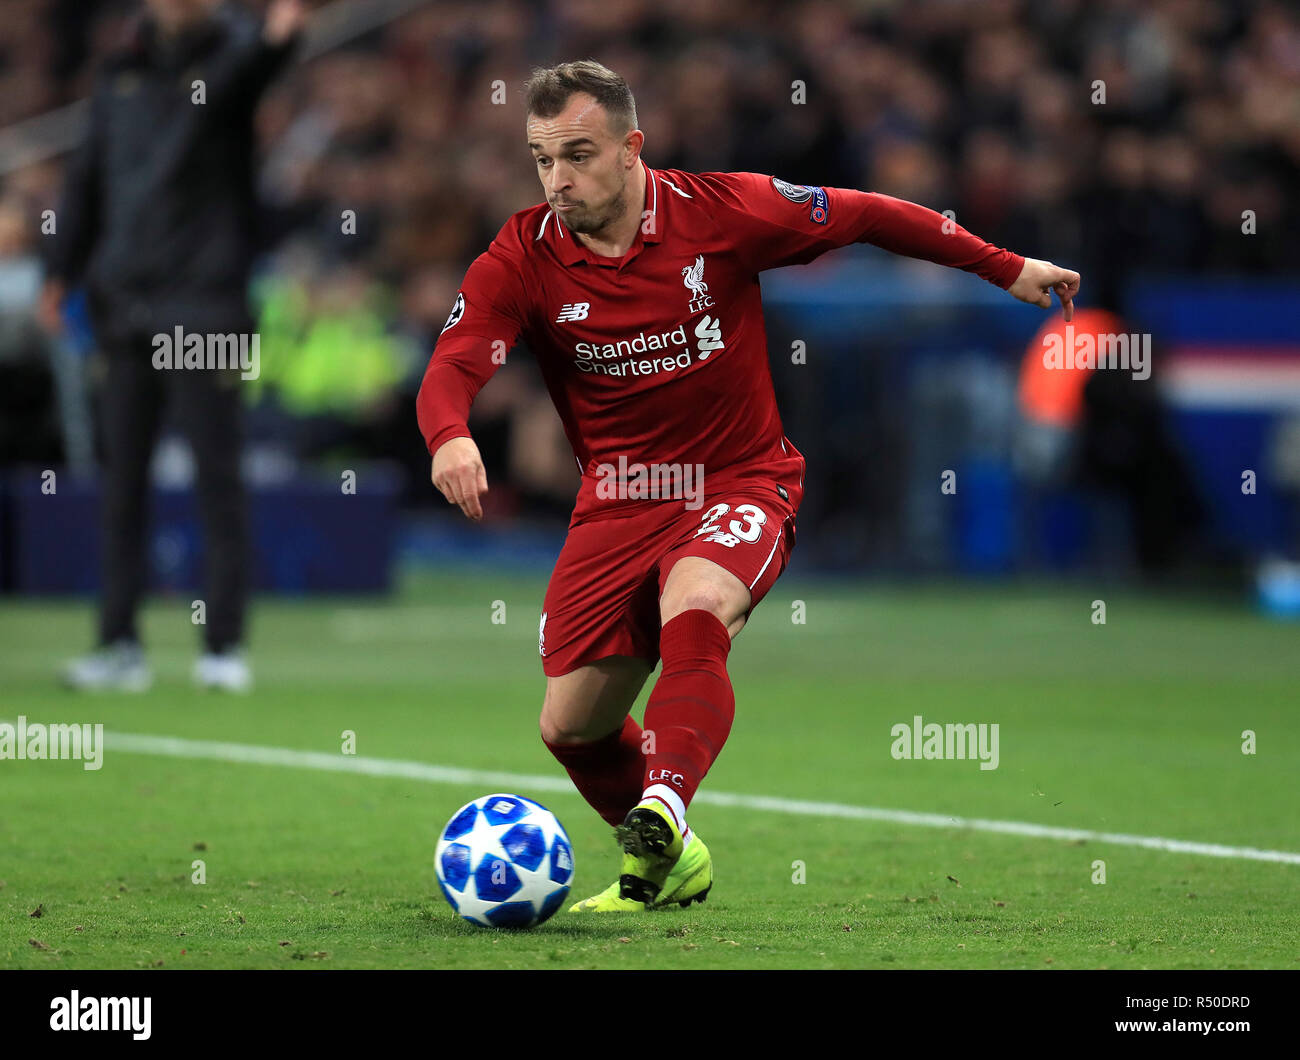 Liverpool's Xherdan Shaqiri during the UEFA Champions League, Group C match at the Parc des Princes, Paris. PRESS ASSOCIATION Photo. Picture date: Wednesday November 28, 2018. See PA story SOCCER PSG. Photo credit should read: Mike Egerton/PA Wire. Stock Photo